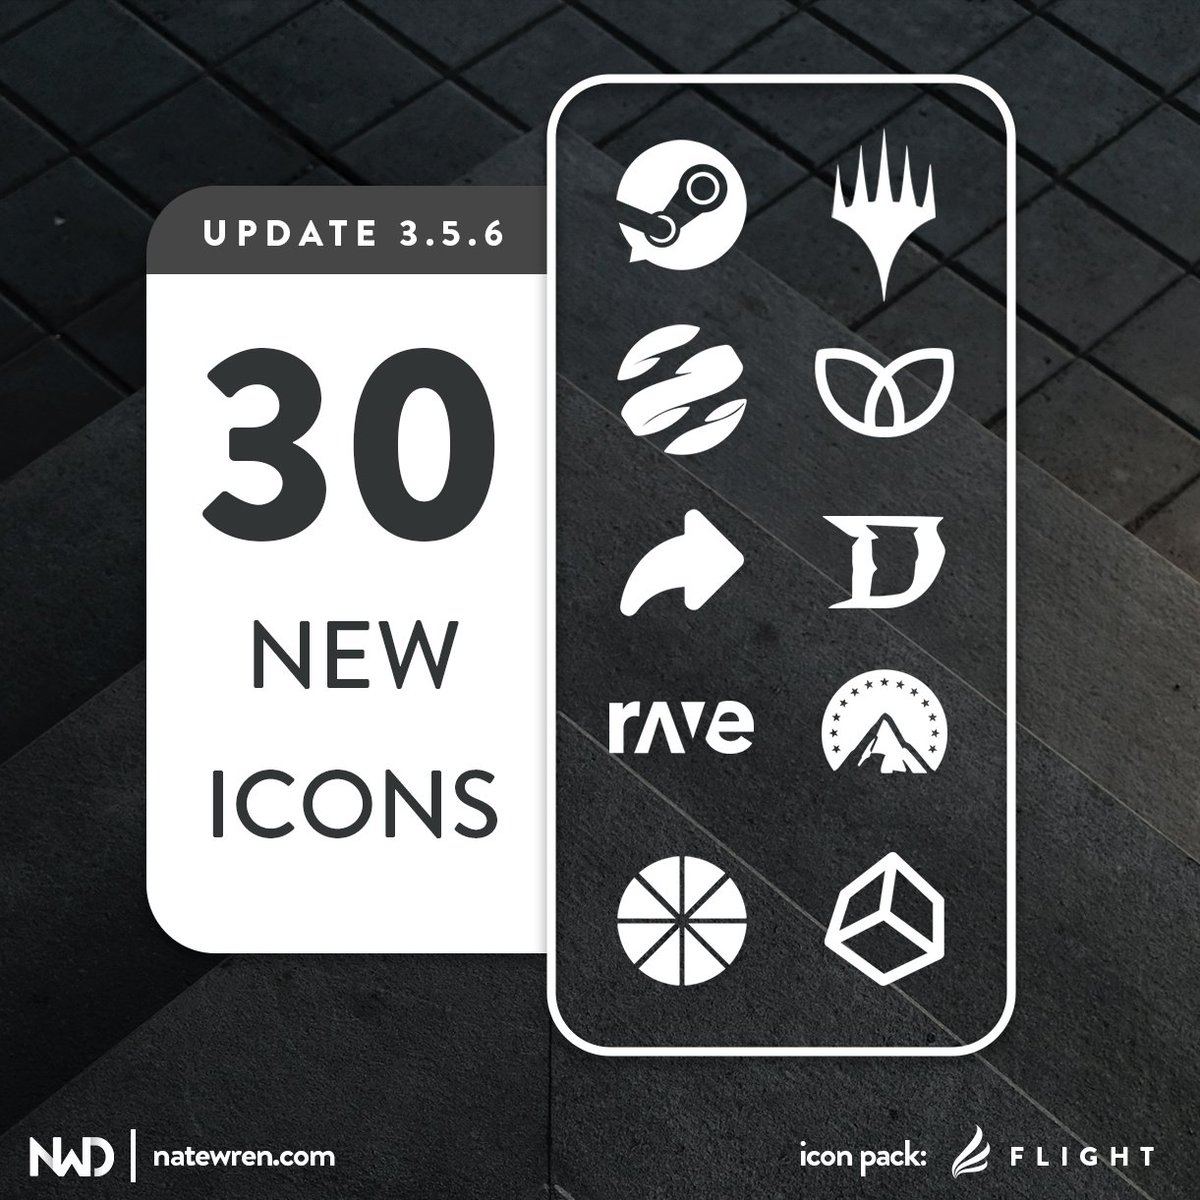 Icon packs updated! Android v3.5.6 includes 30 new icons in pro versions. bit.ly/3uBONZT

#minimalsetup #homescreen #androidsetup #wallpaper #android #androidapps #androidcustomization #minimal #homescreensetup #iconpack #icons #androidicons